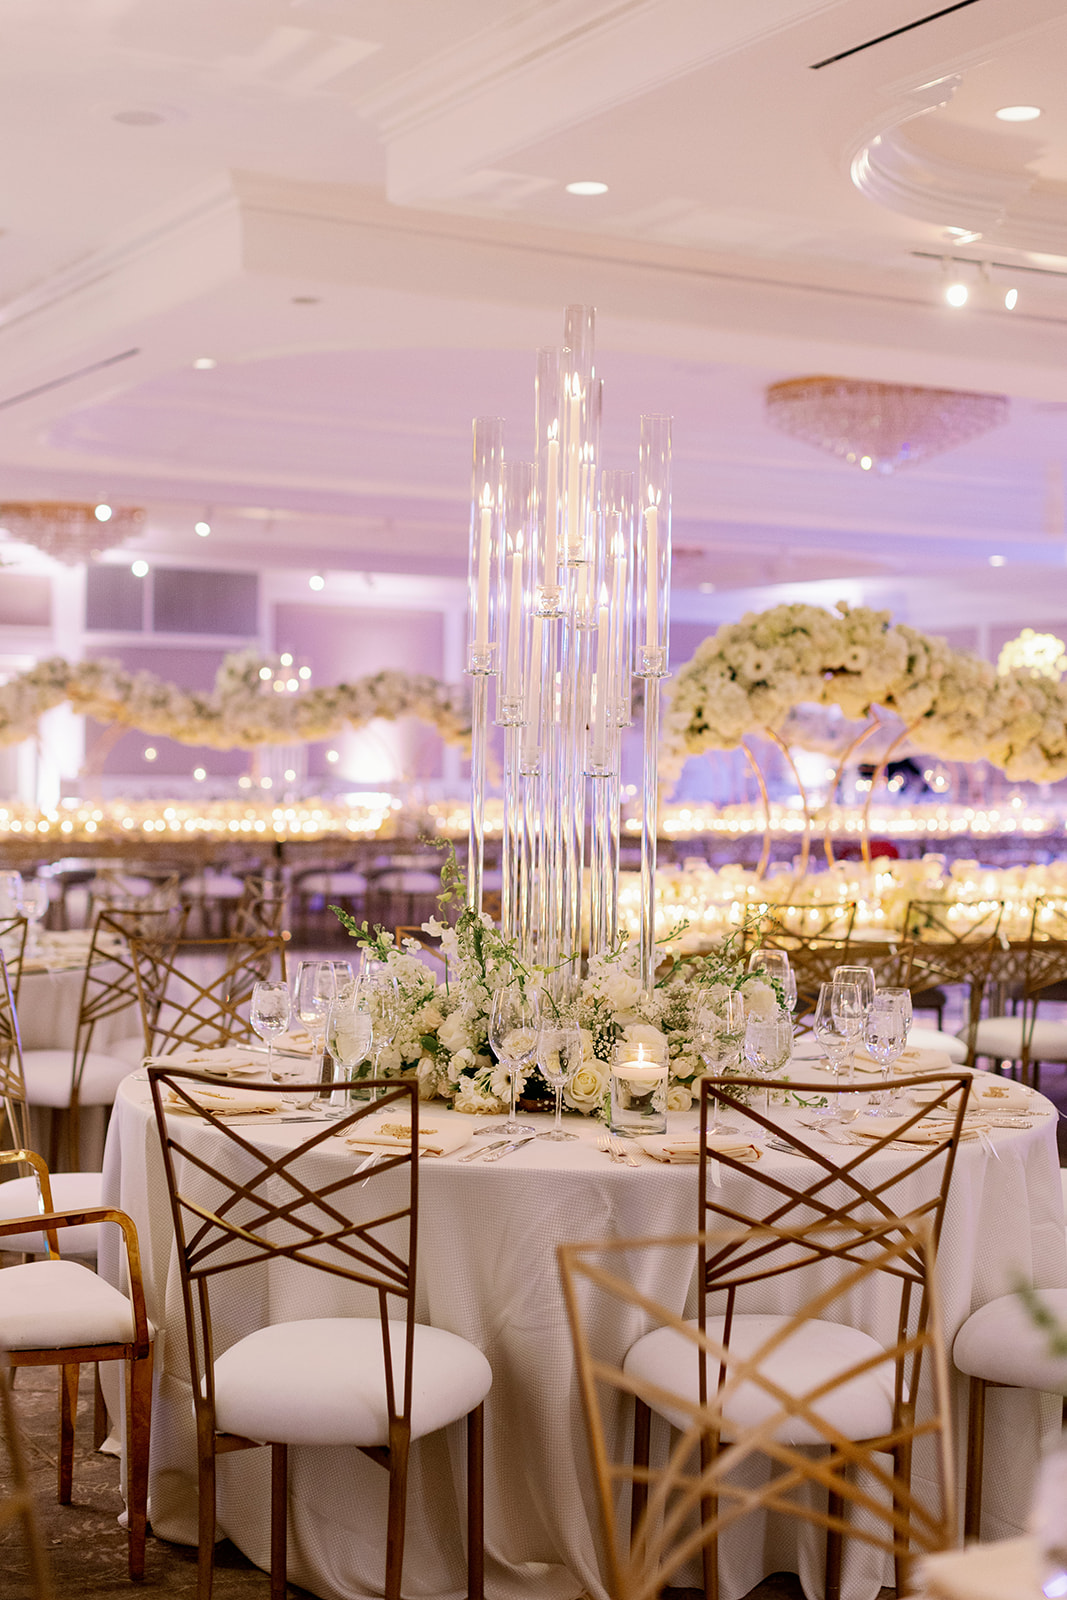 Luxury glam wedding reception with gold accents, large floating floral installations and glass centerpieces. 